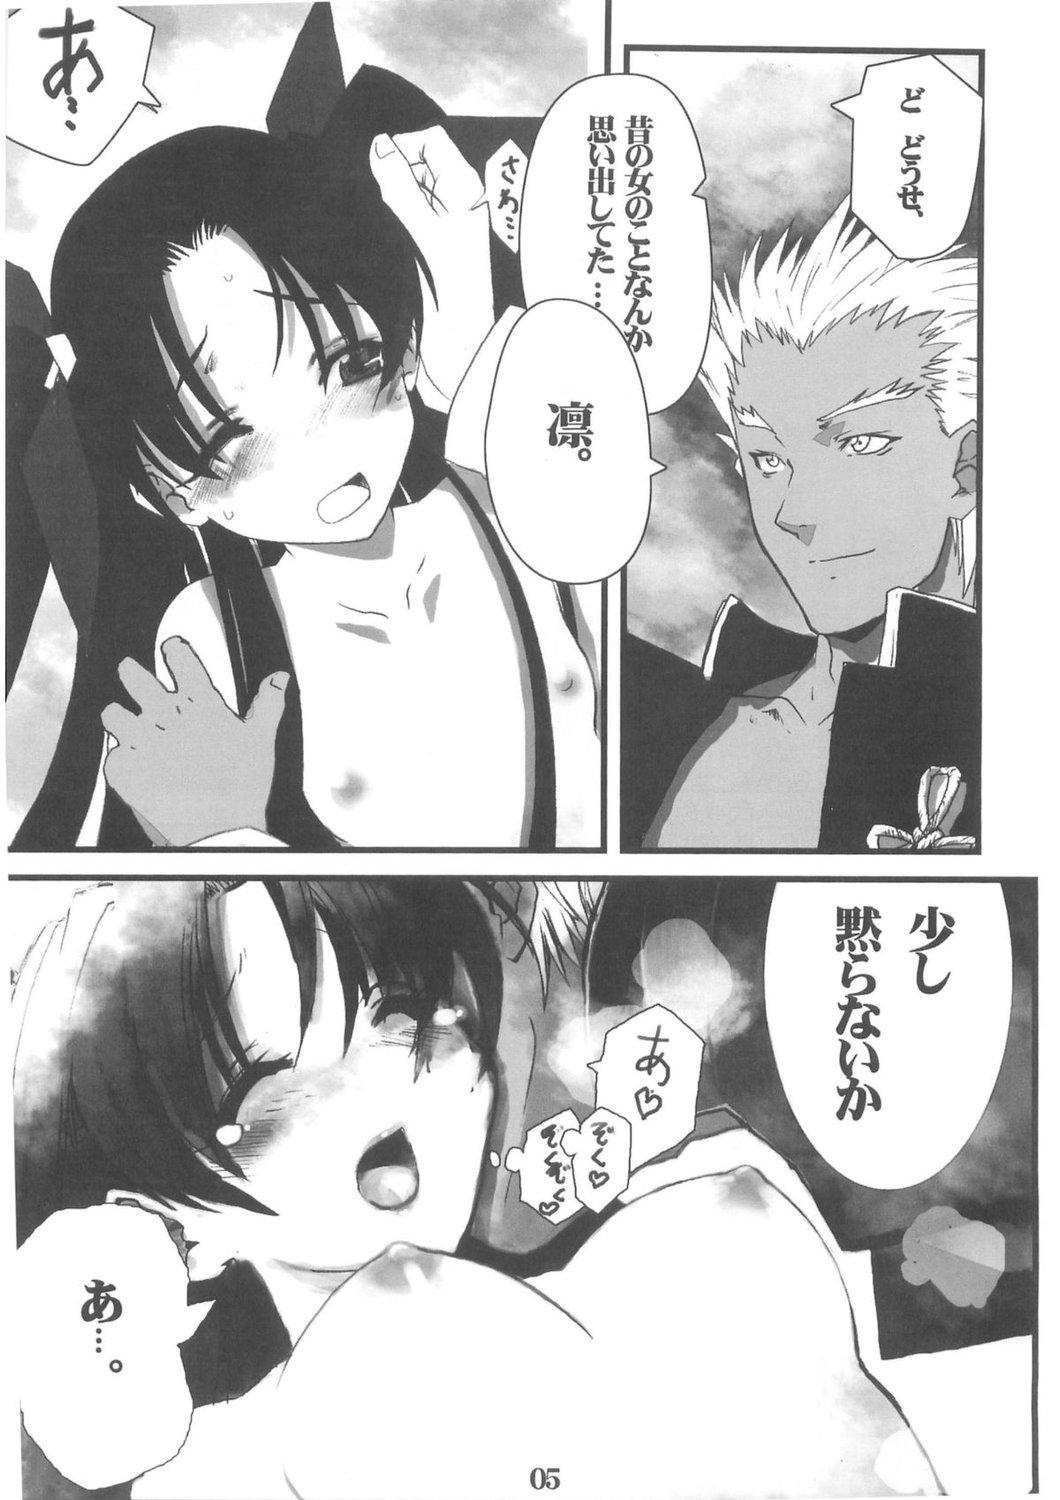 Hair Berry Berry - Fate stay night Big Dicks - Page 5